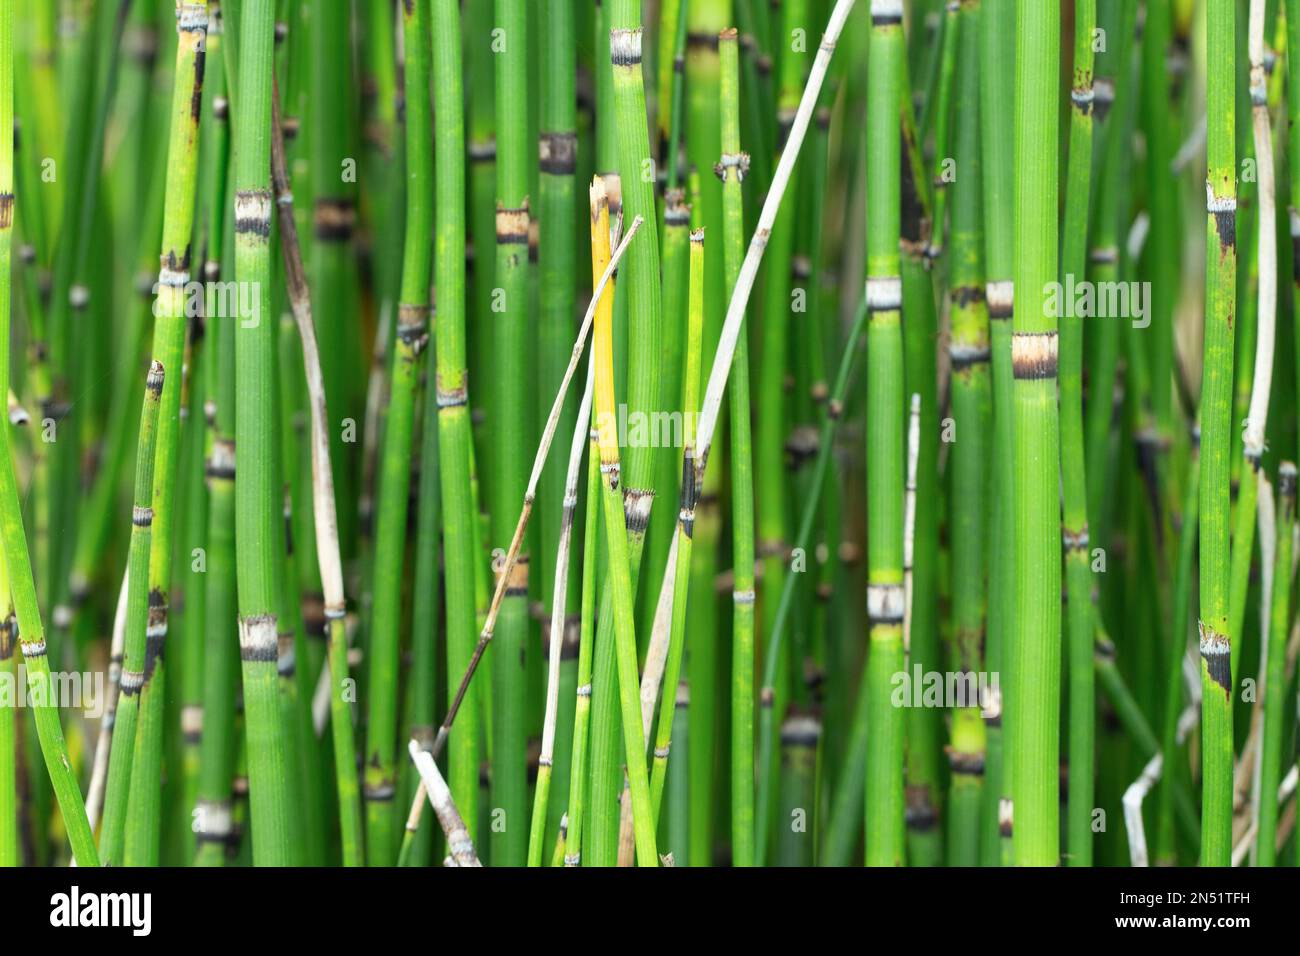 Equisetum Hyemale or Scouring rush horsetail is a grass-like bamboo plant, used for ornamental plants. Stock Photo